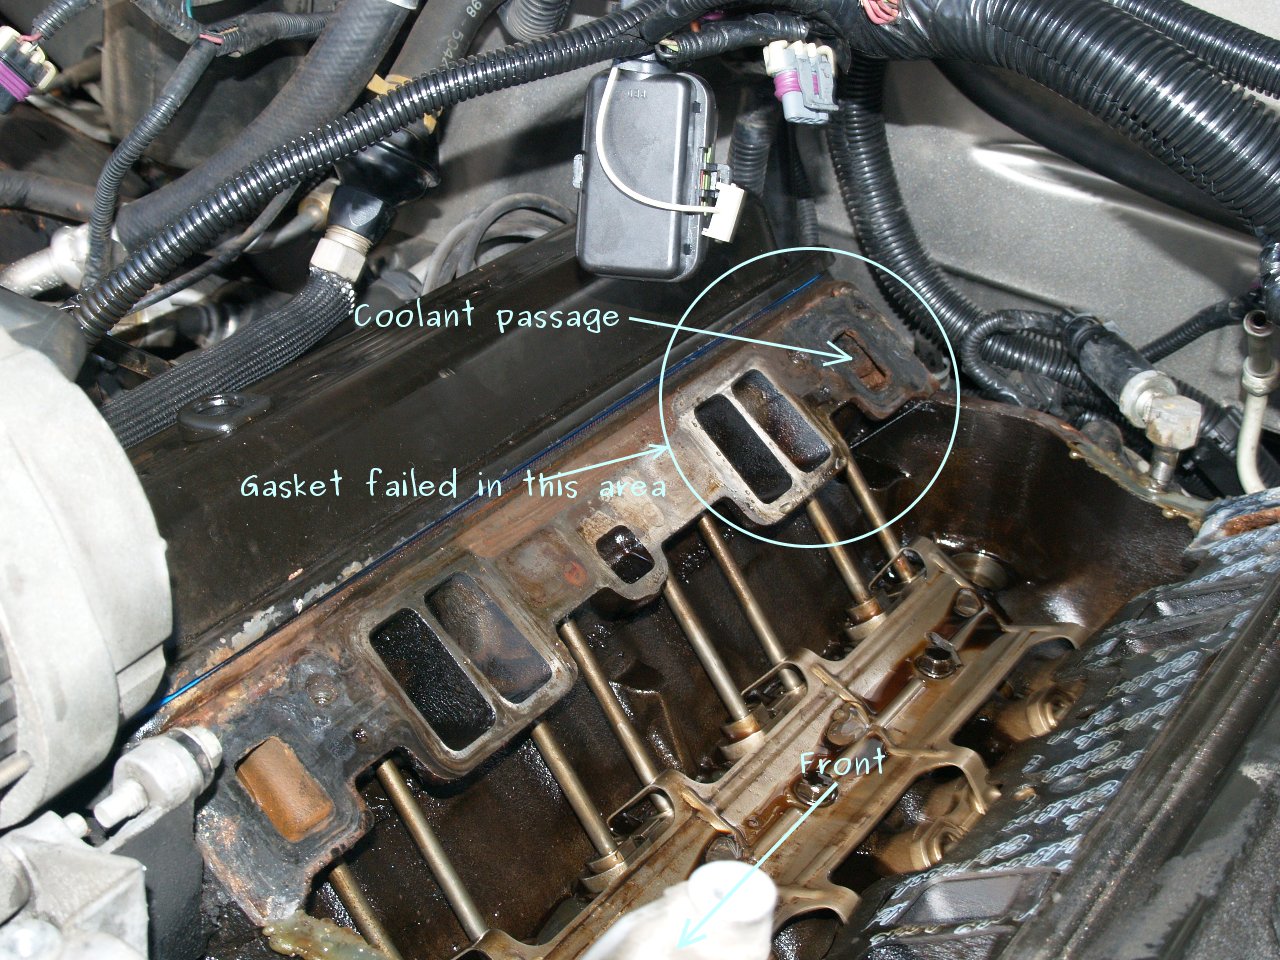 See P071D in engine